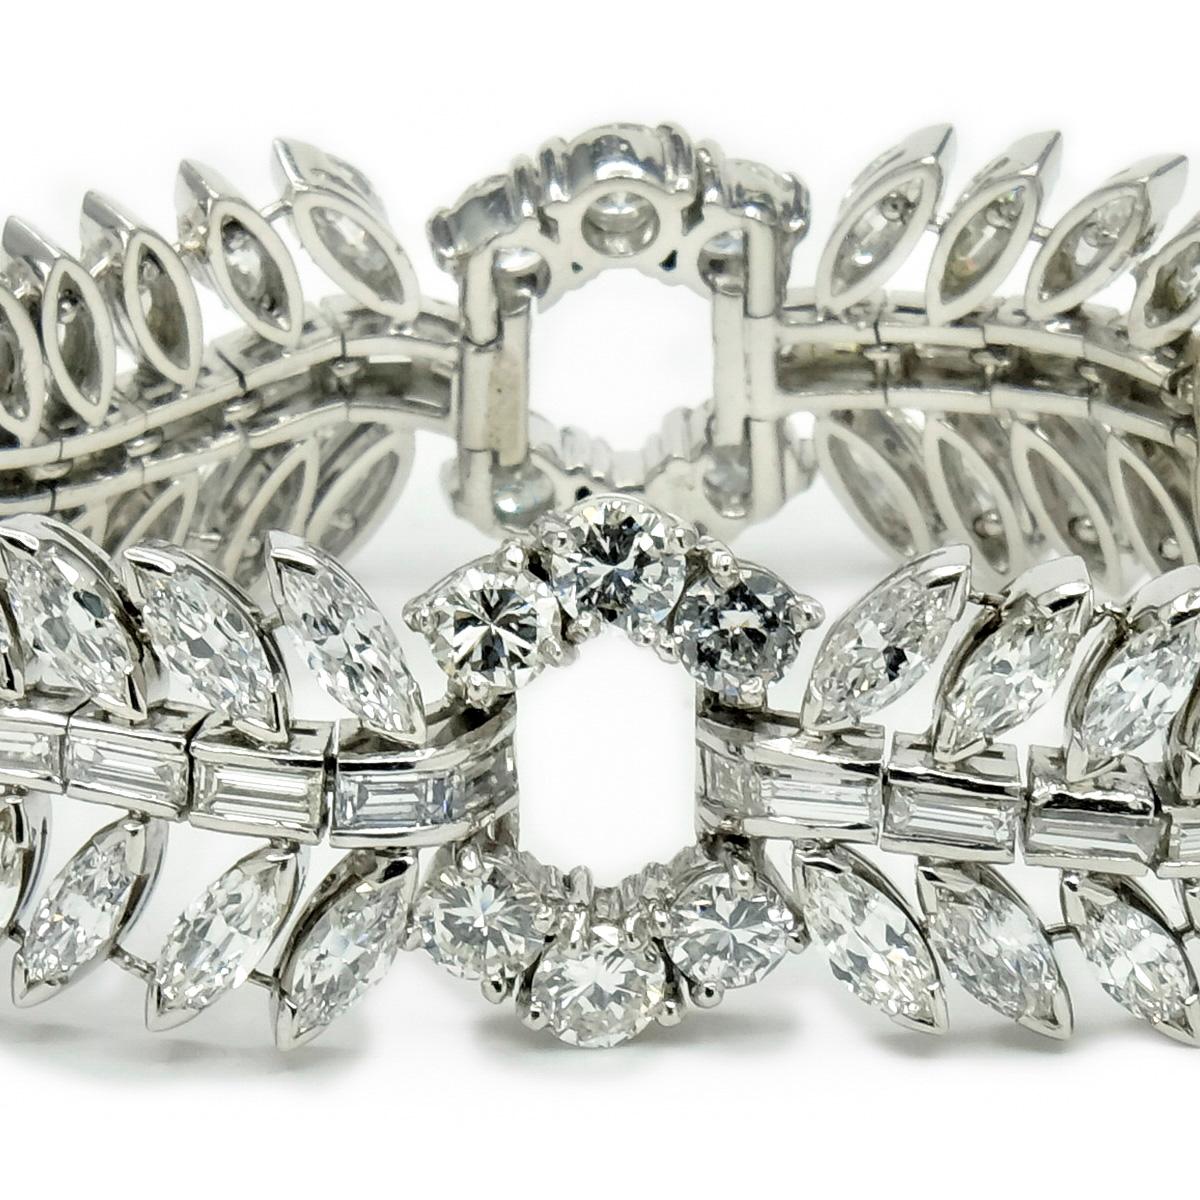 Period: Retro
Year: 1940s
Material: Platinum, 32cts Mixed Cut featuring Marquis and Baguette and Old European Cut Diamonds
Weight: 82.5 grams
Length: 17.78cm./7 inches
Width: 1.875cm./0.73 inches at Widest Point
Condition: Pristine Vintage, Handmade